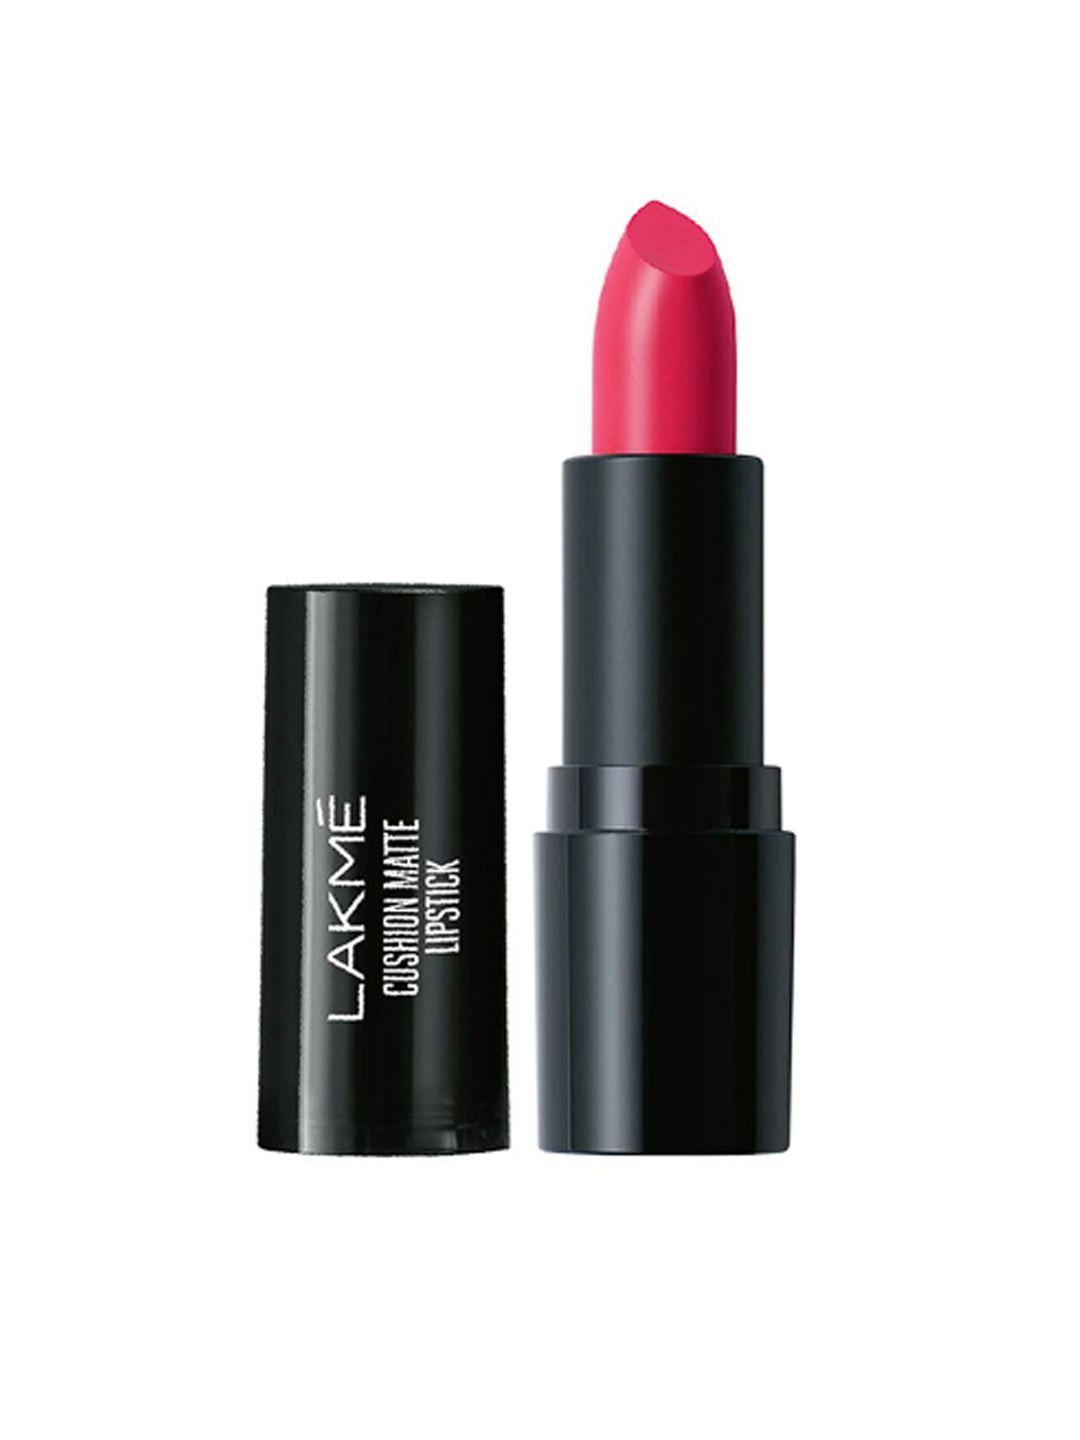 lakme cushion matte lipstick with french rose oil - pink ruby